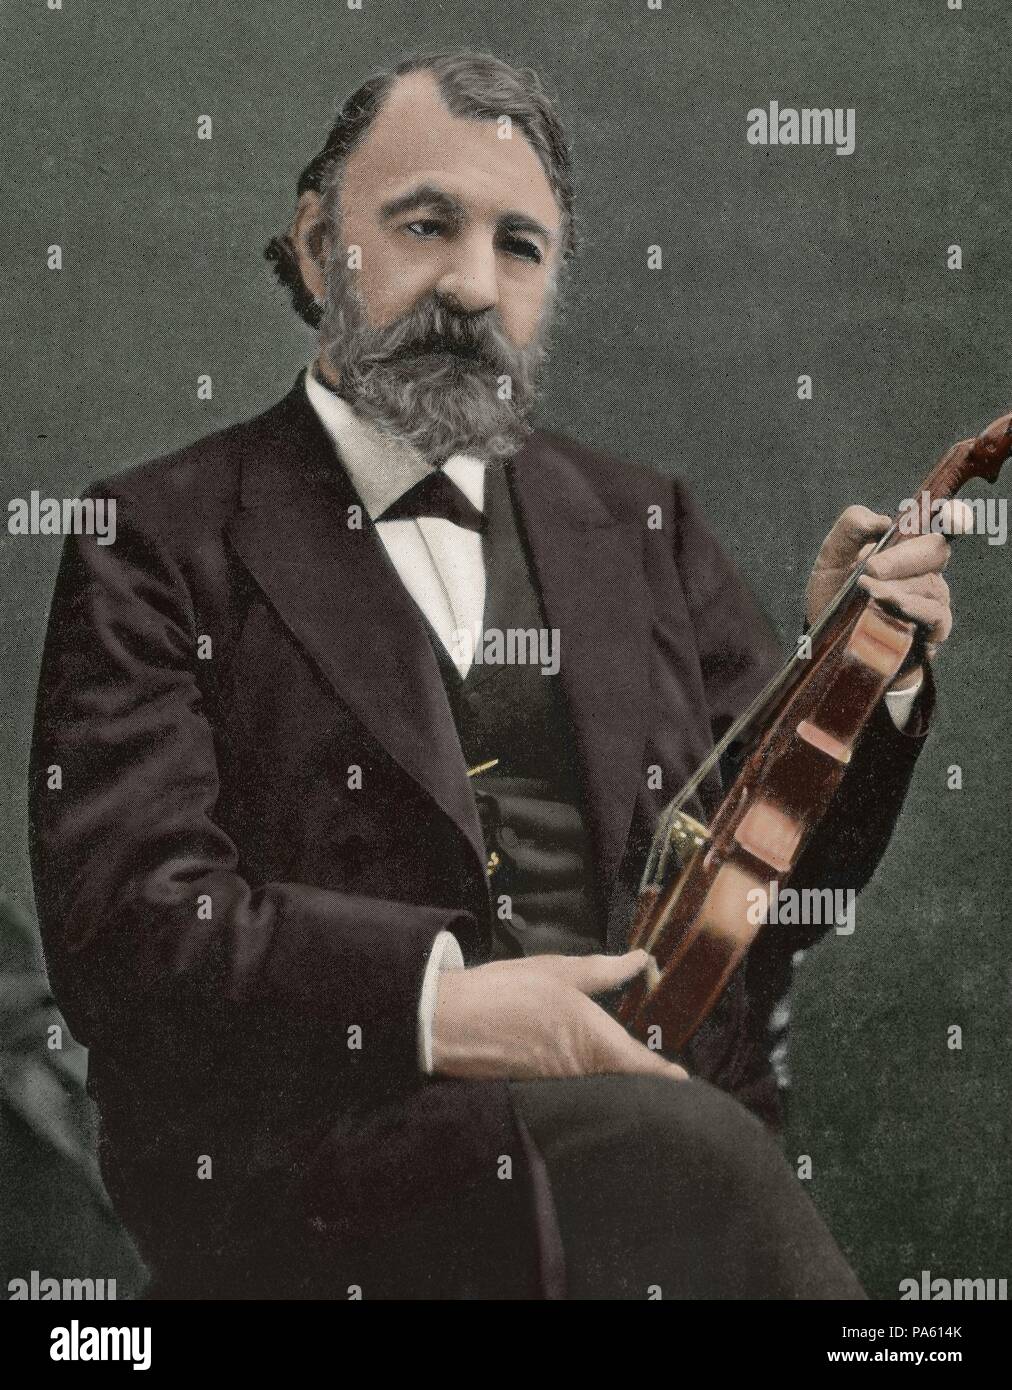 Joseph Joachim (1831-1907). Hungarian violinist, conductor, composer and teacher. Portrait. Photography. Colored. Stock Photo